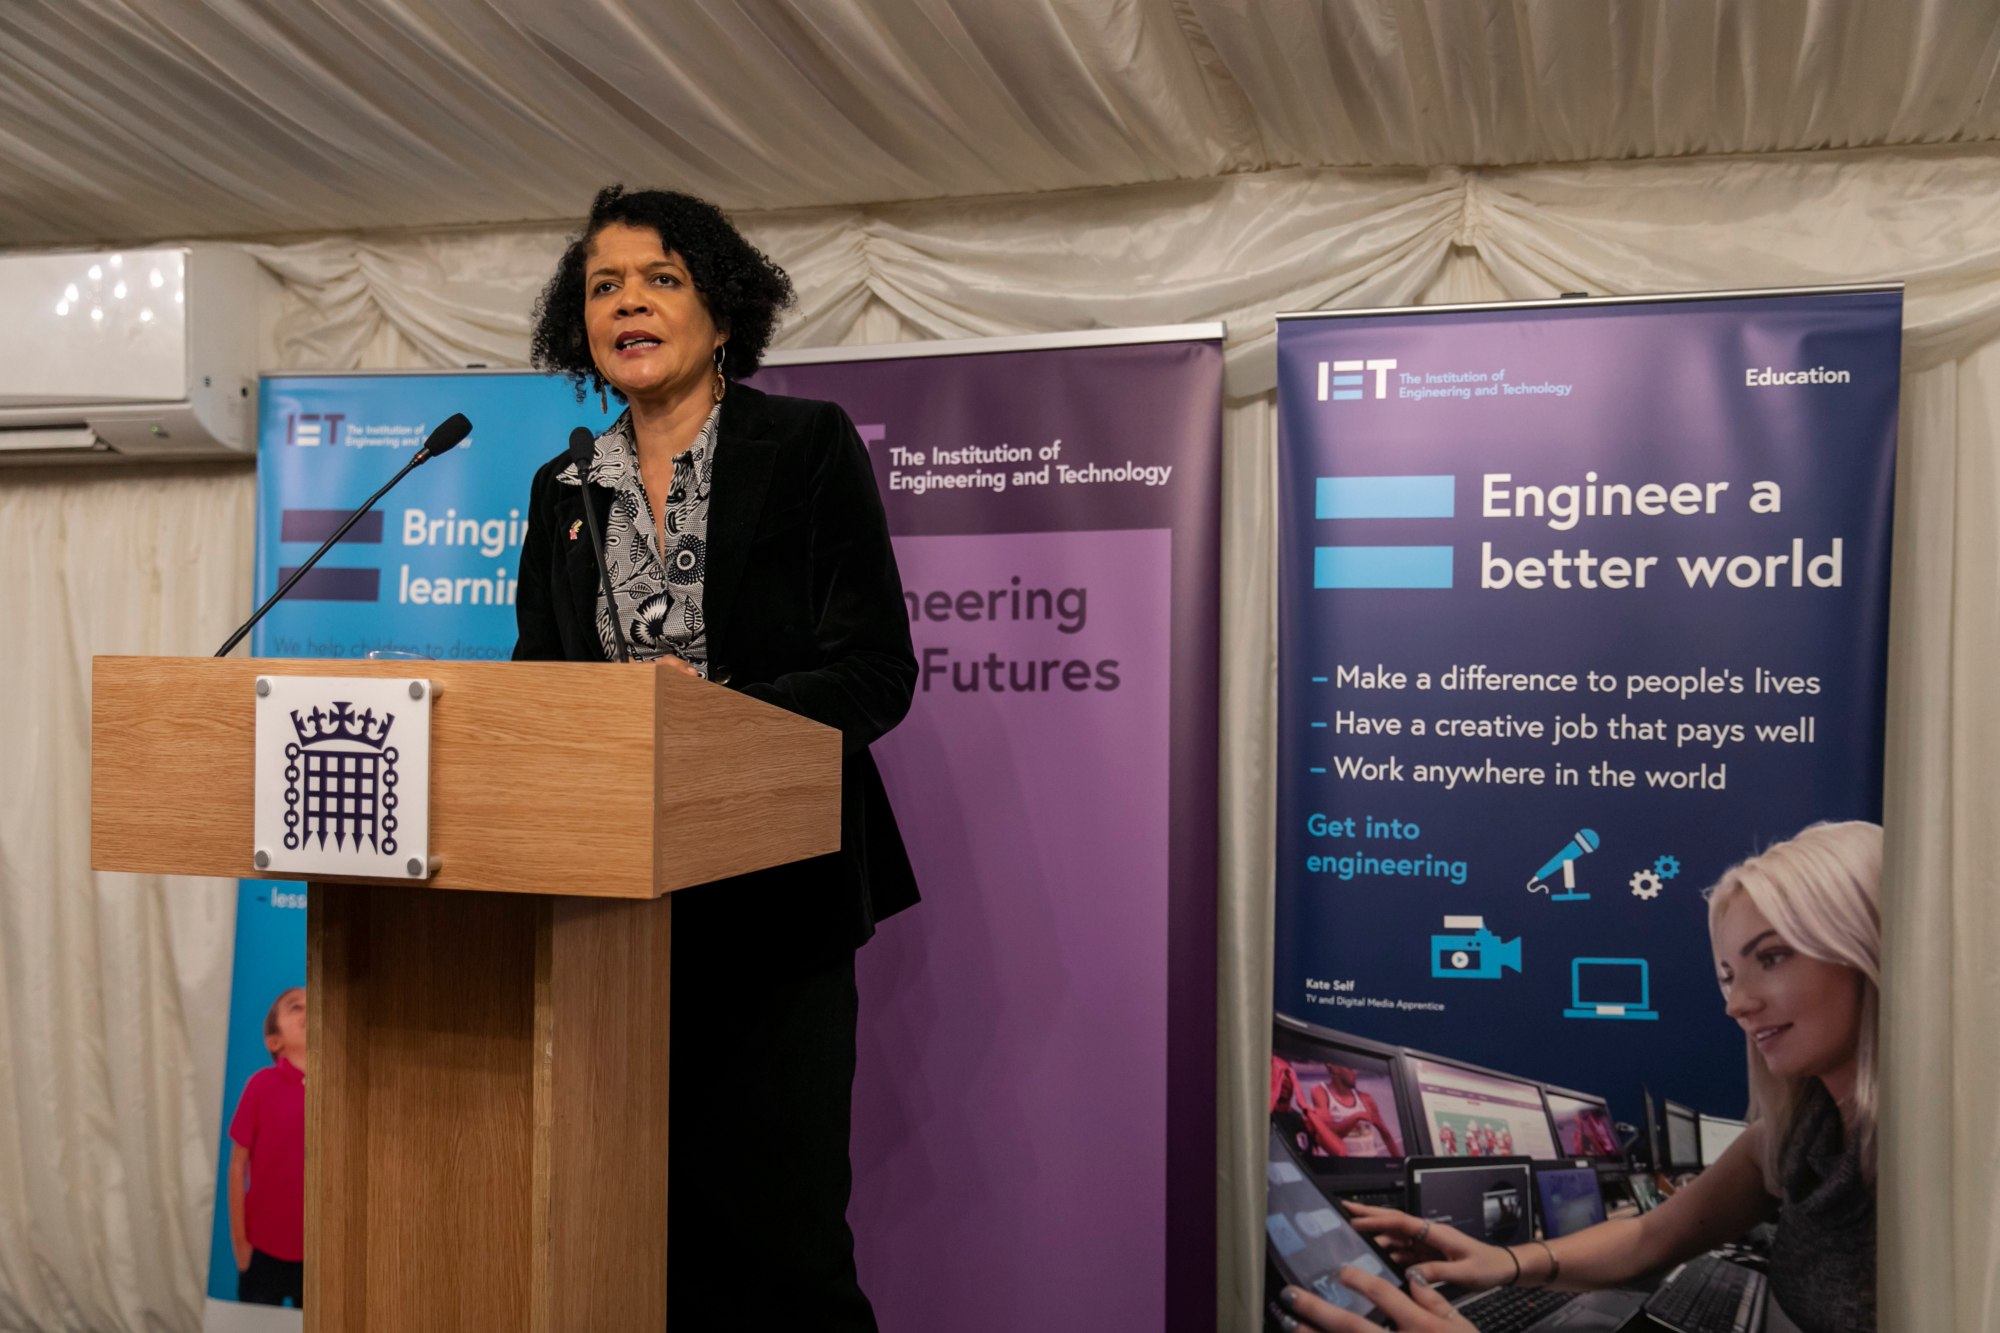 Shadow Minister for Science, Research and Digital, Chi Onwurah MP